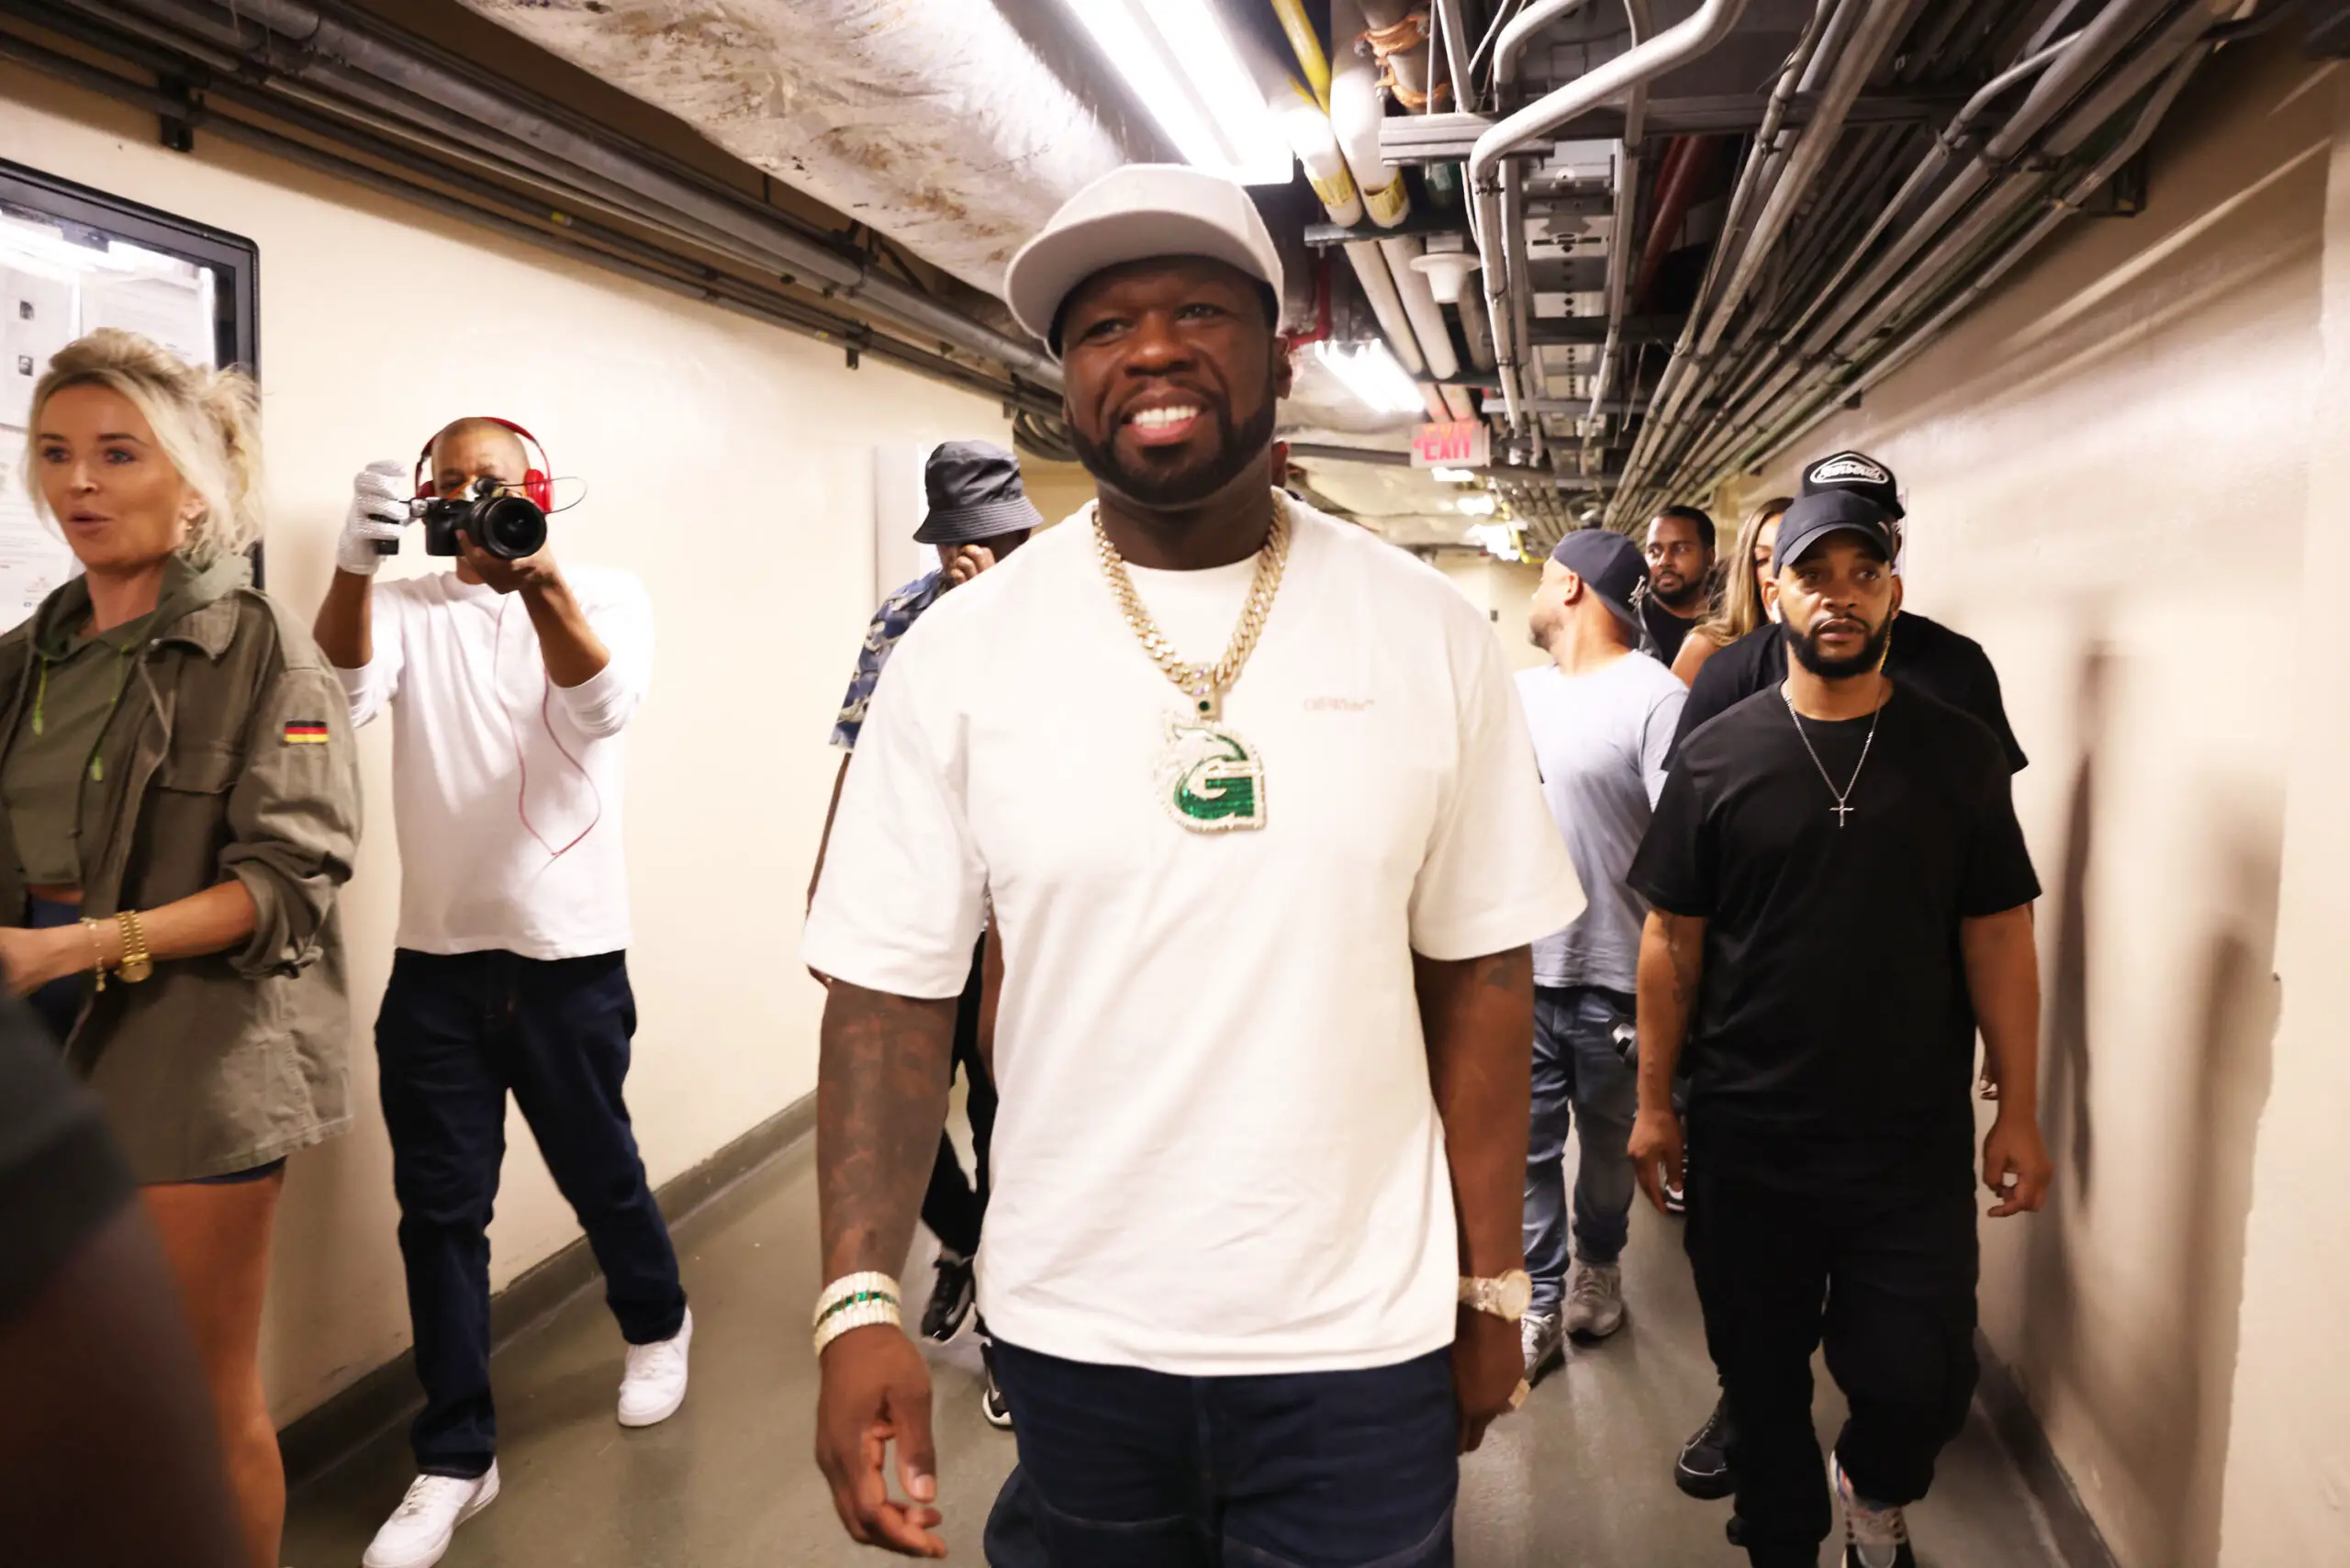 50 Cent is in town – not that one – the one where it's a book sale